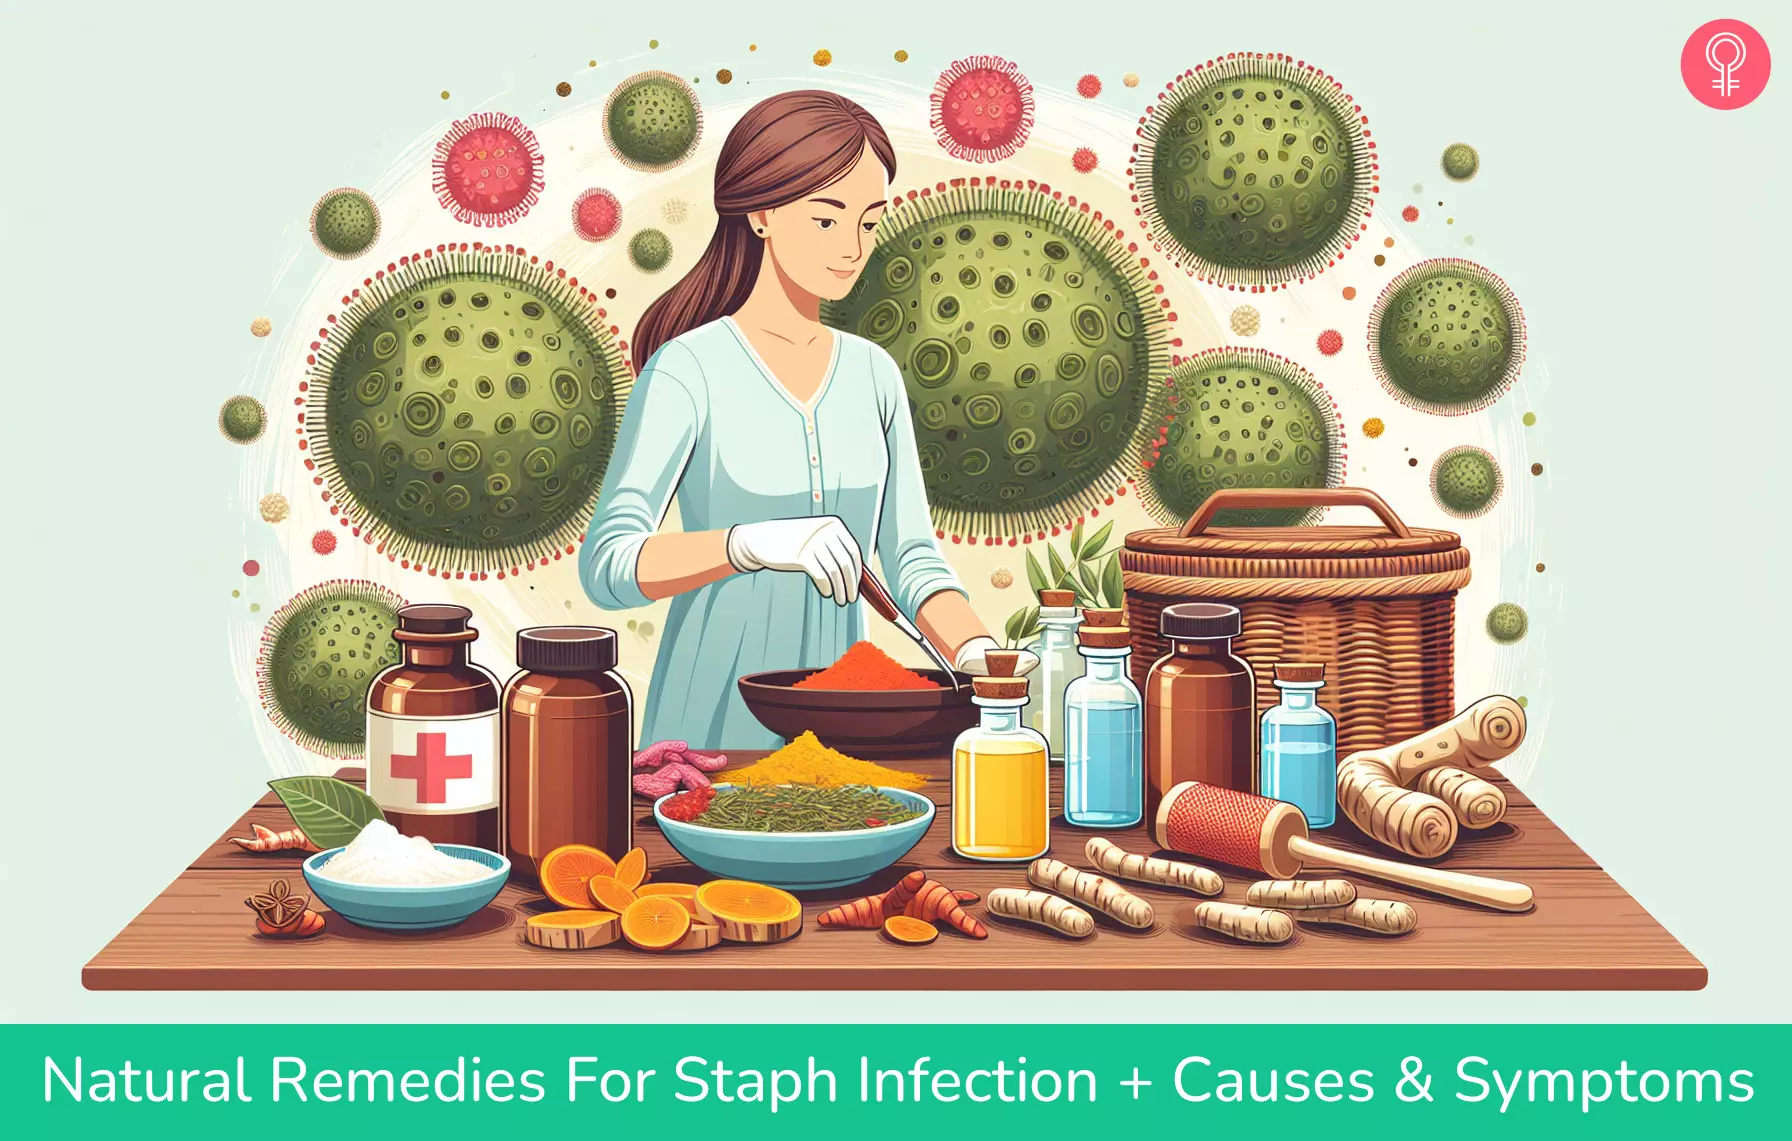 home remedies for staph infection_illustration